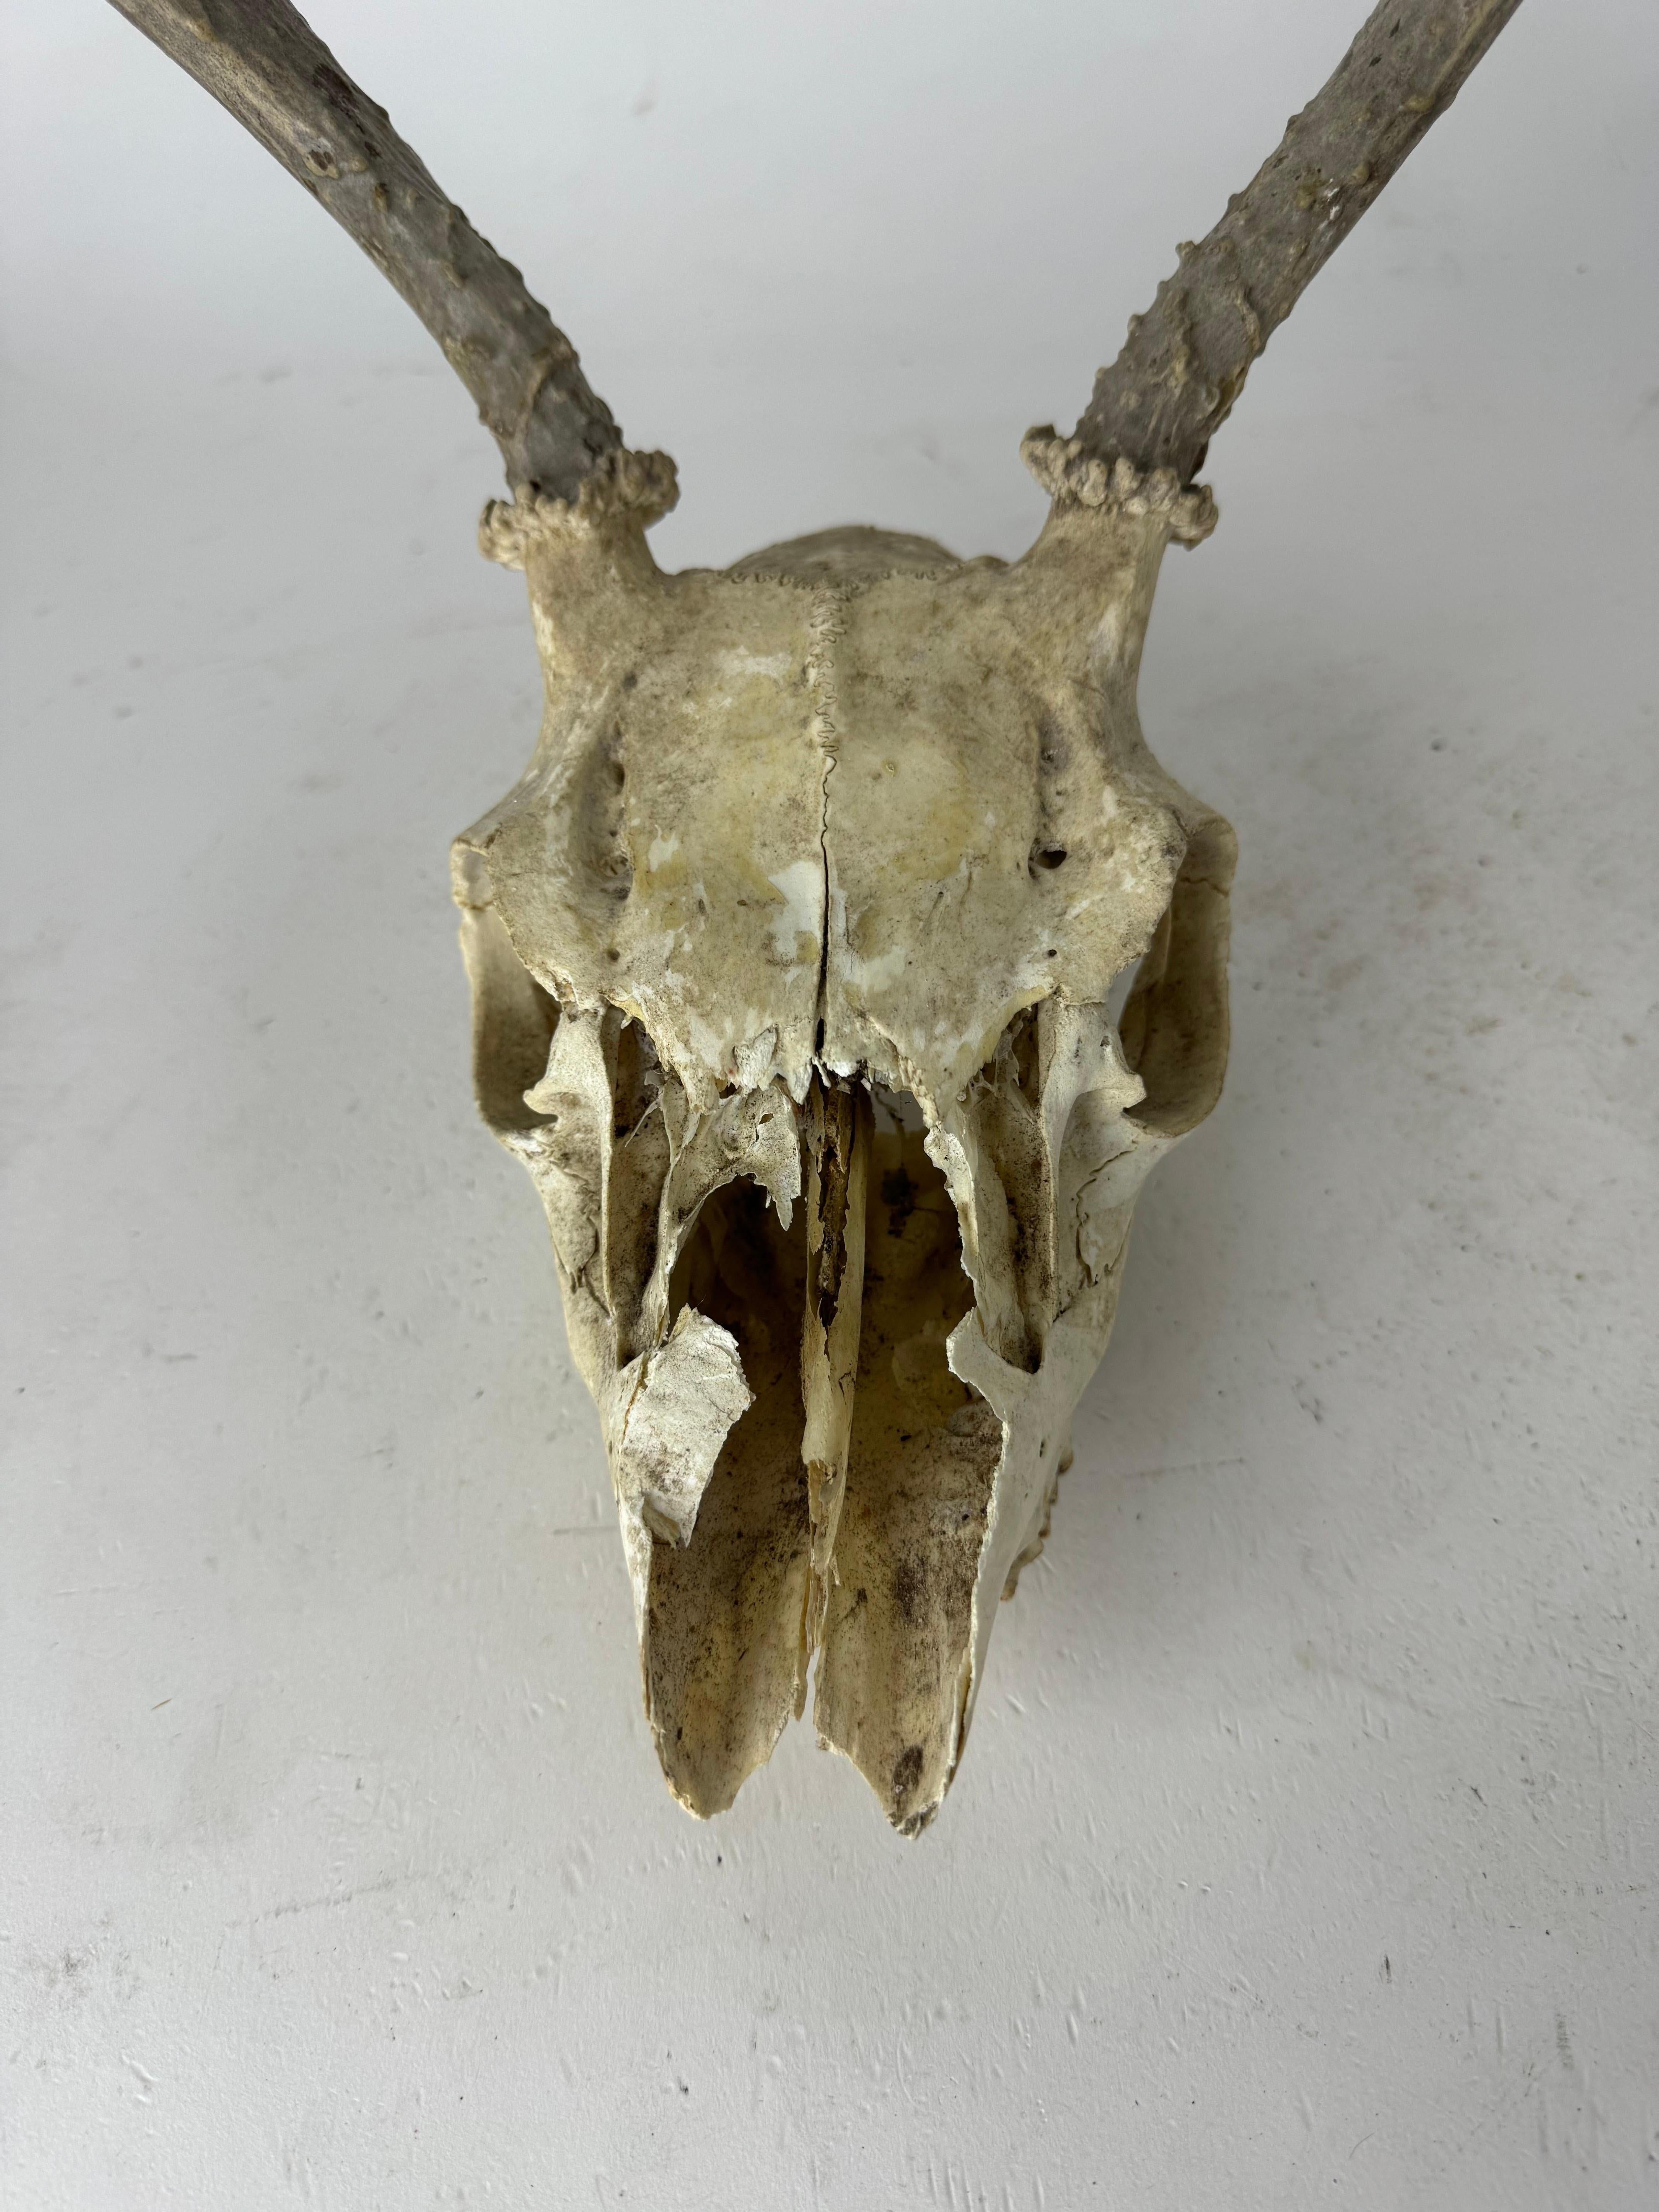 Vintage Deer Skull with Antlers, This is a Unique Decor Piece for Sale! 

Unleash the rustic charm with our one-of-a-kind vintage deer skull with antlers, perfect for adding character to your space. This intriguing piece showcases the beauty of